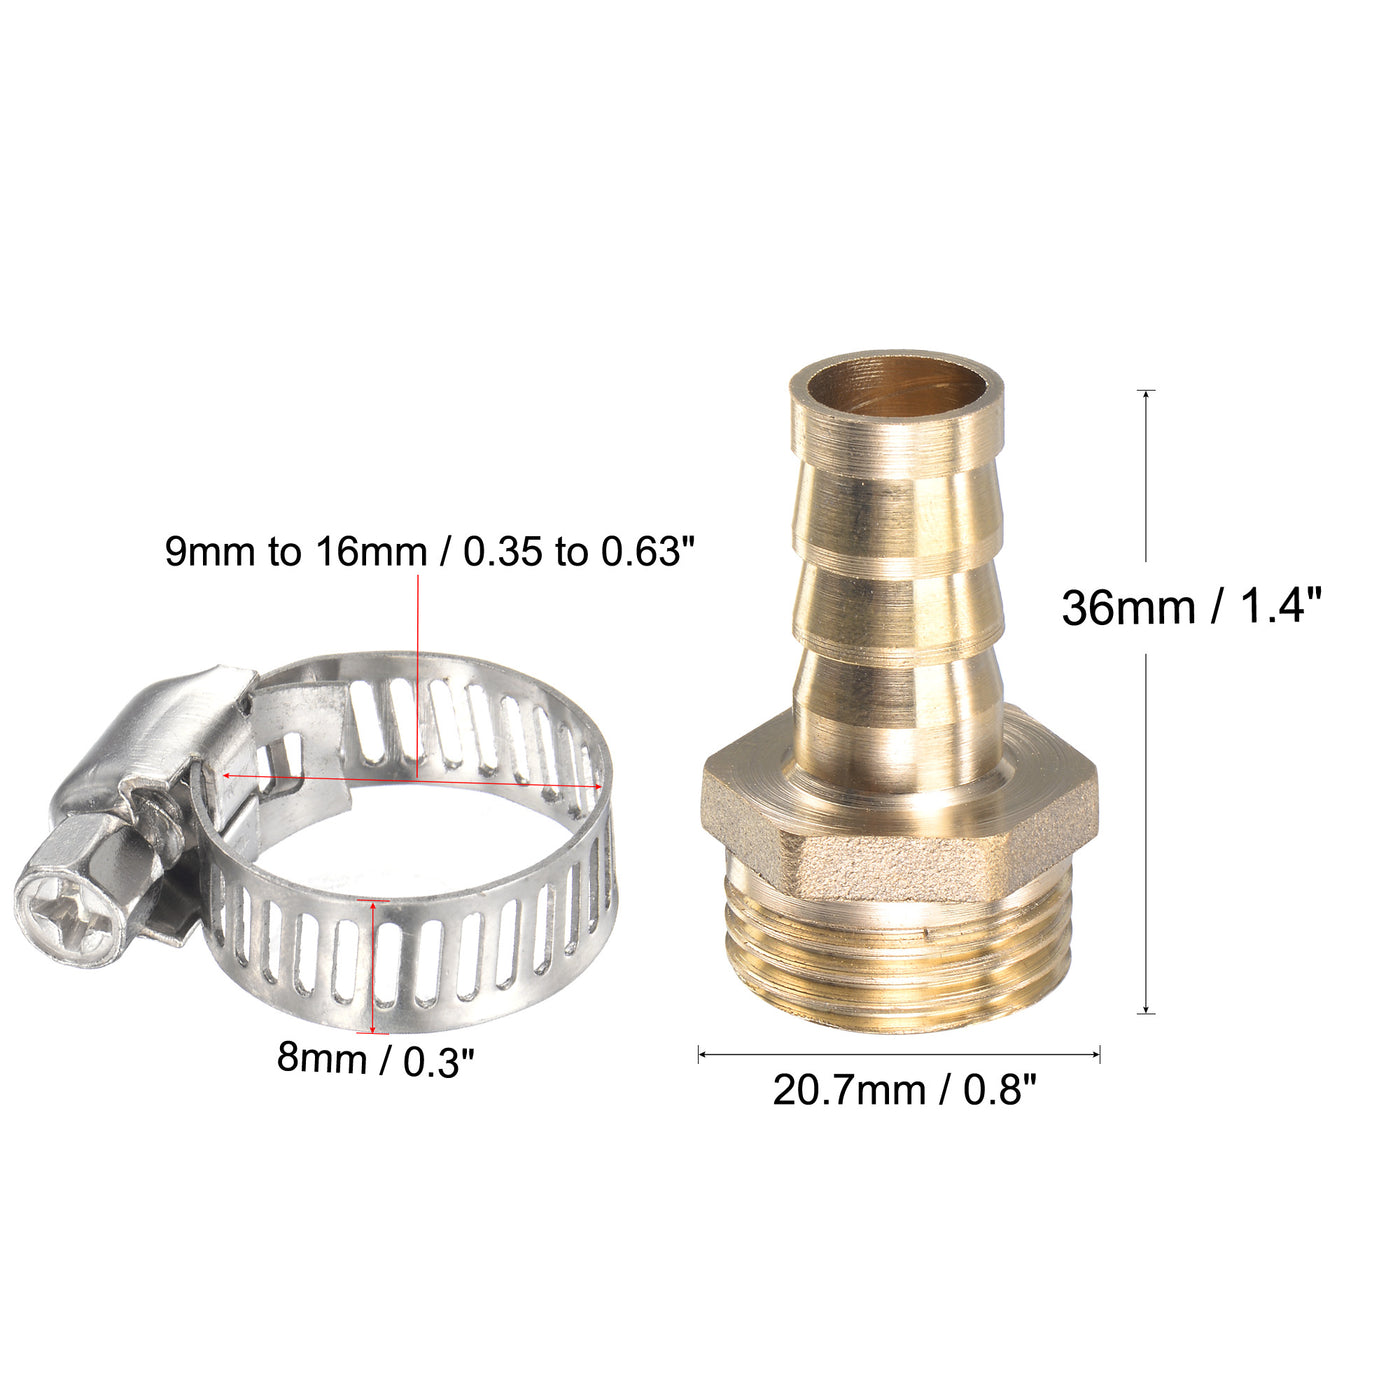 Uxcell Uxcell Brass Hose Barb Fitting Straight 6mm x G1/2 Male Thread Pipe Connector with Stainless Steel Hose Clamp, Pack of 2